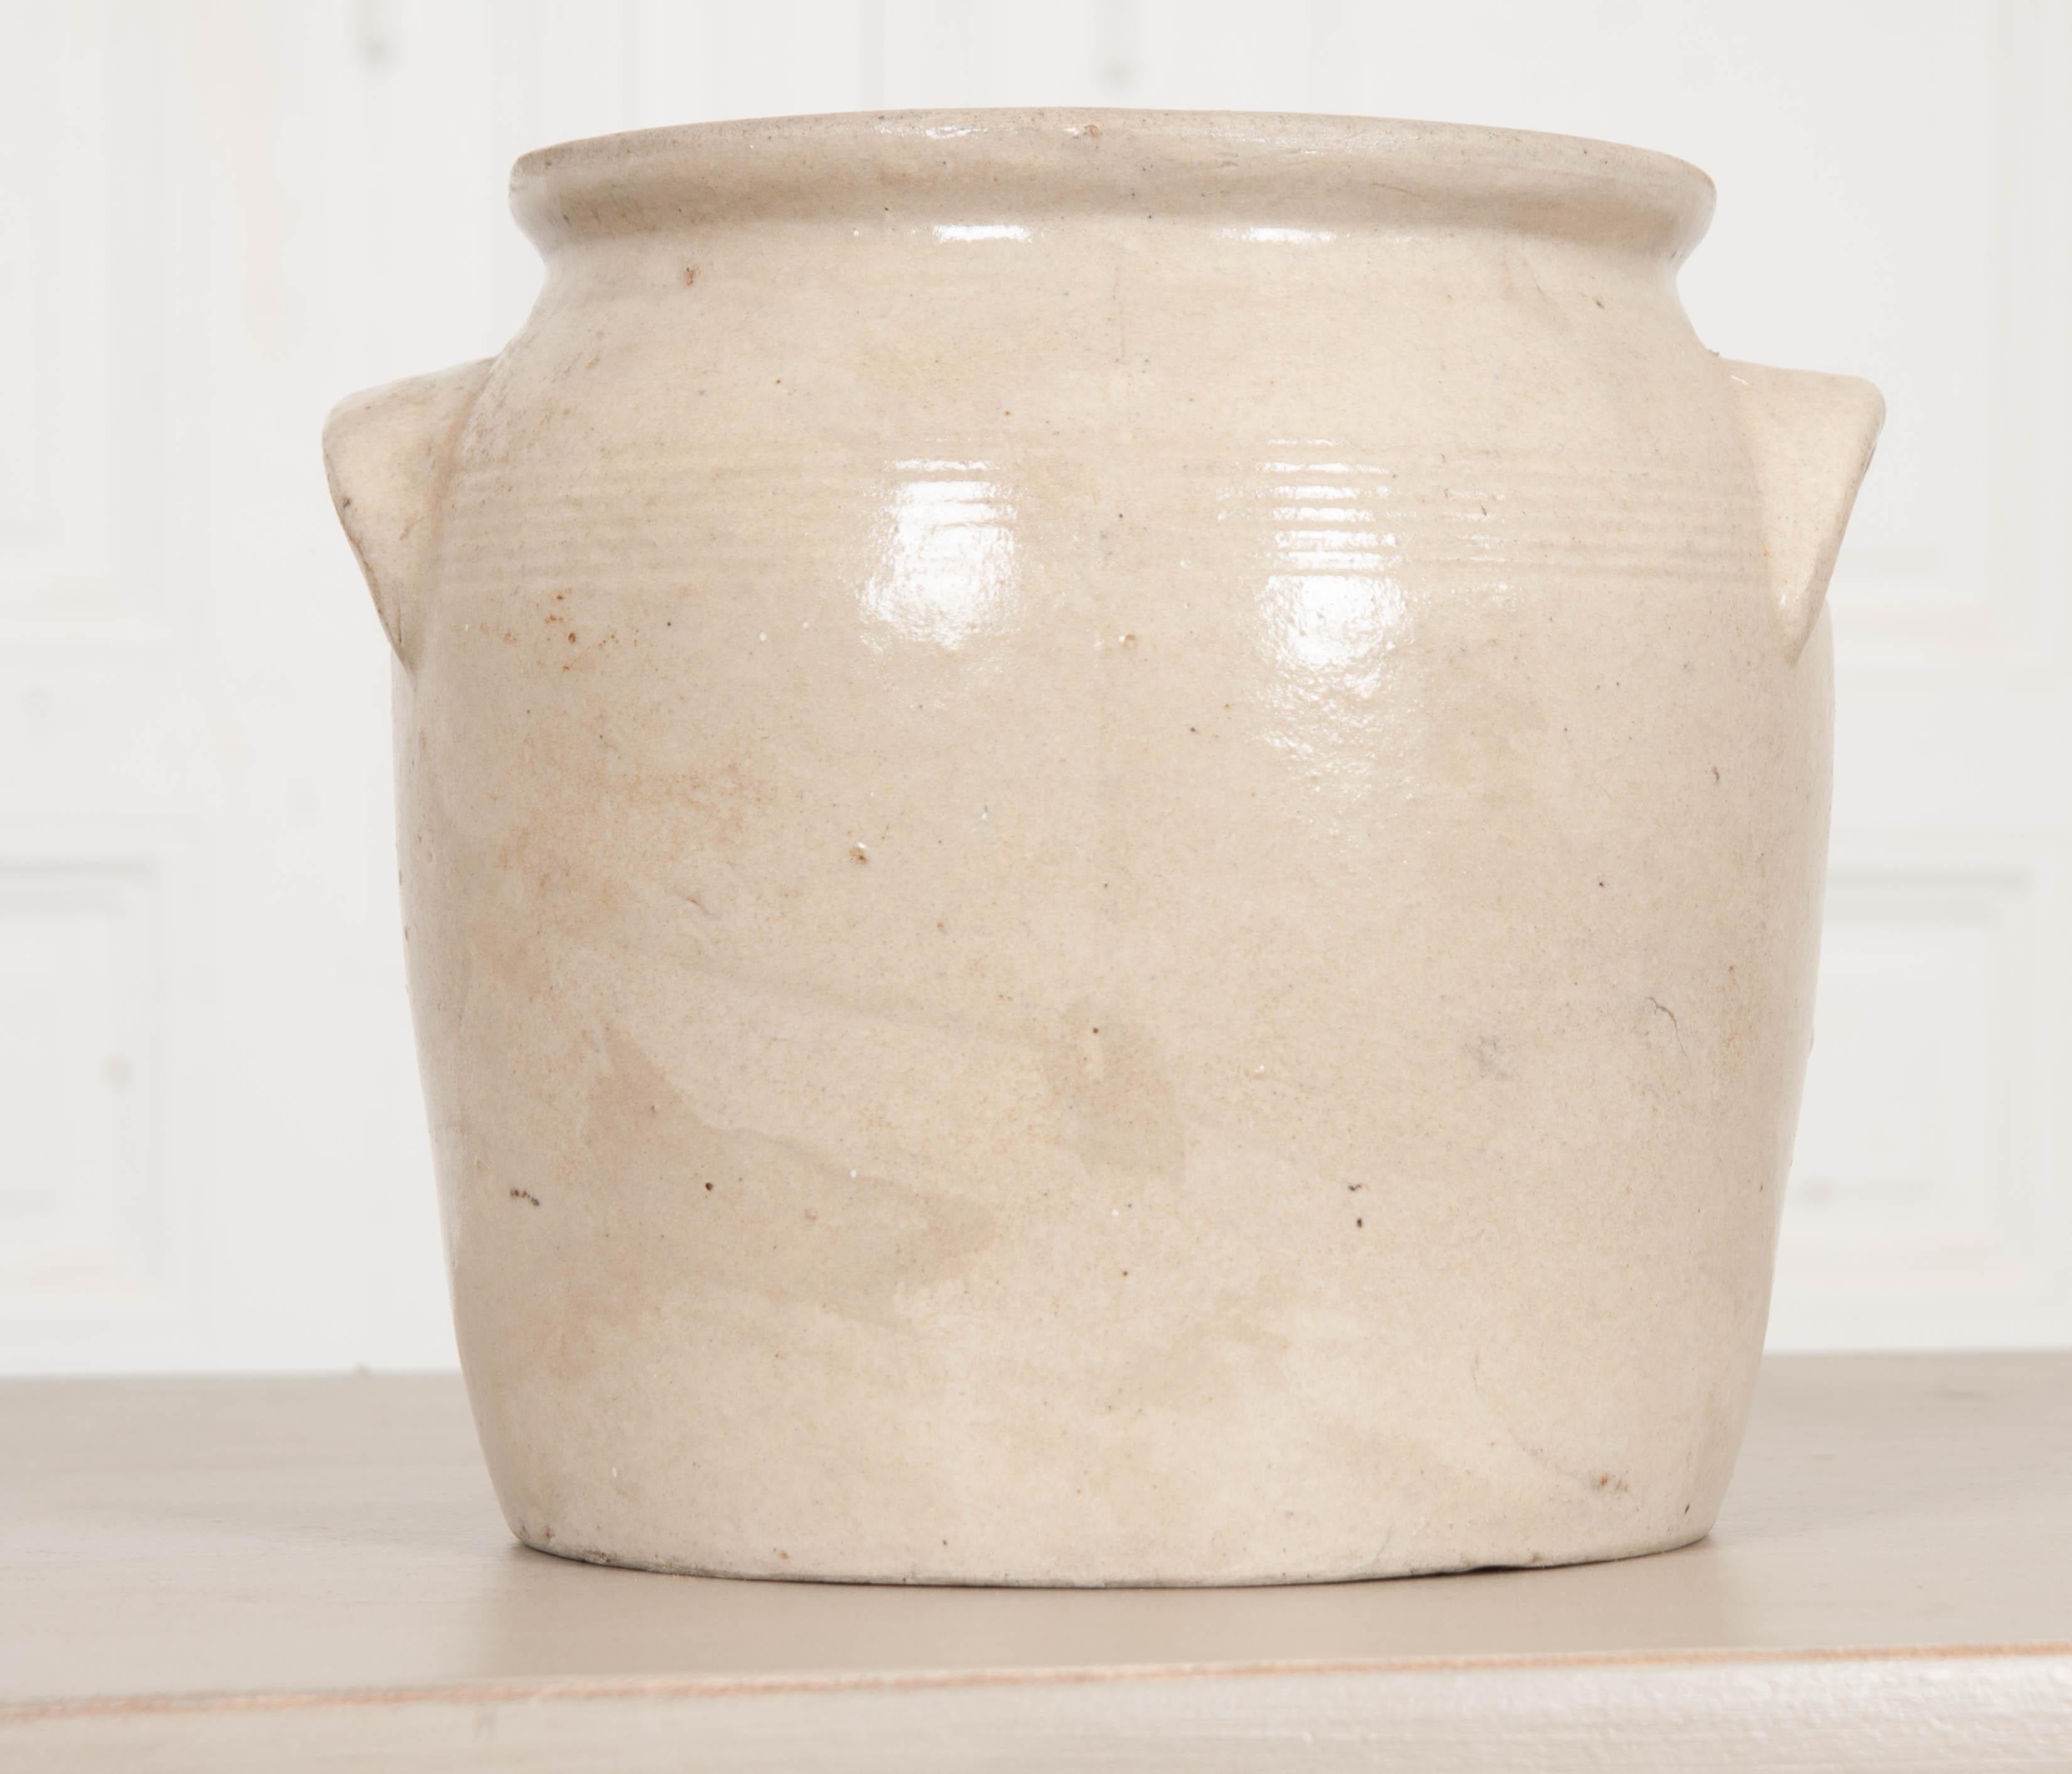 This vintage Provincial glazed earthenware crock is from France. Its cupped handles make lifting the pot a little easier, and the decorative banding found between them gives it a distinct style. Every ceramic pot will differ slightly, as they are